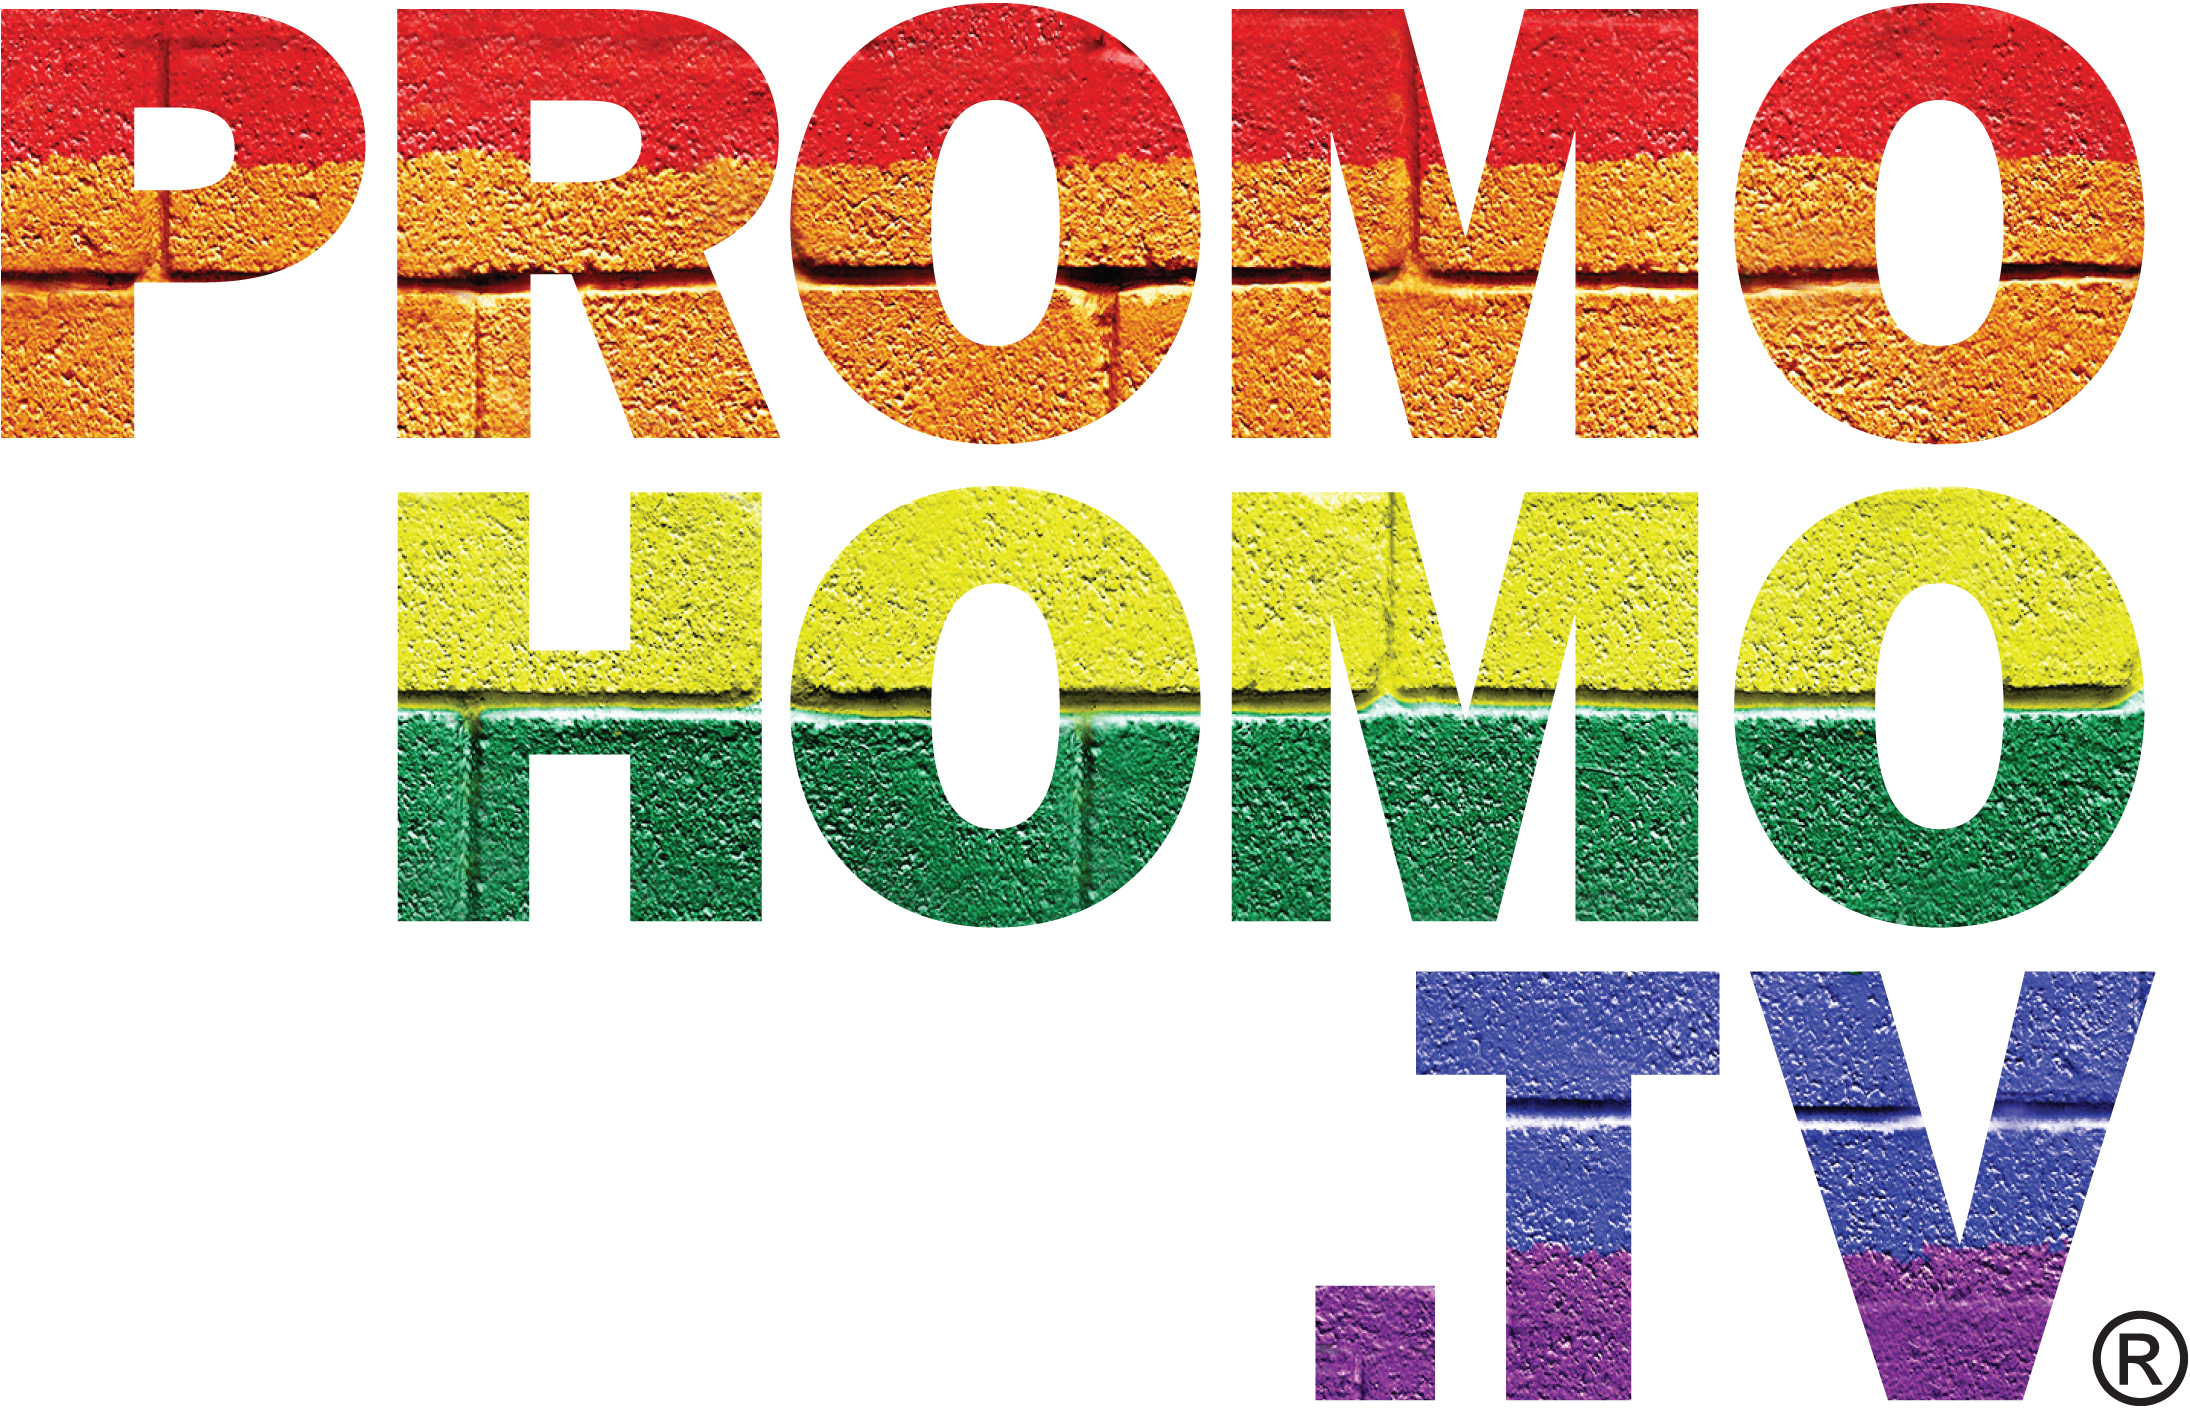 PromoHomo.TV® is "Connecting the Circuitry of Humanity by Creating Programming for LGBTQ+ Everyone!" Find programming at www.PromoHomo.TV and get merch by searching Amazon for "Official PromoHomo.TV.